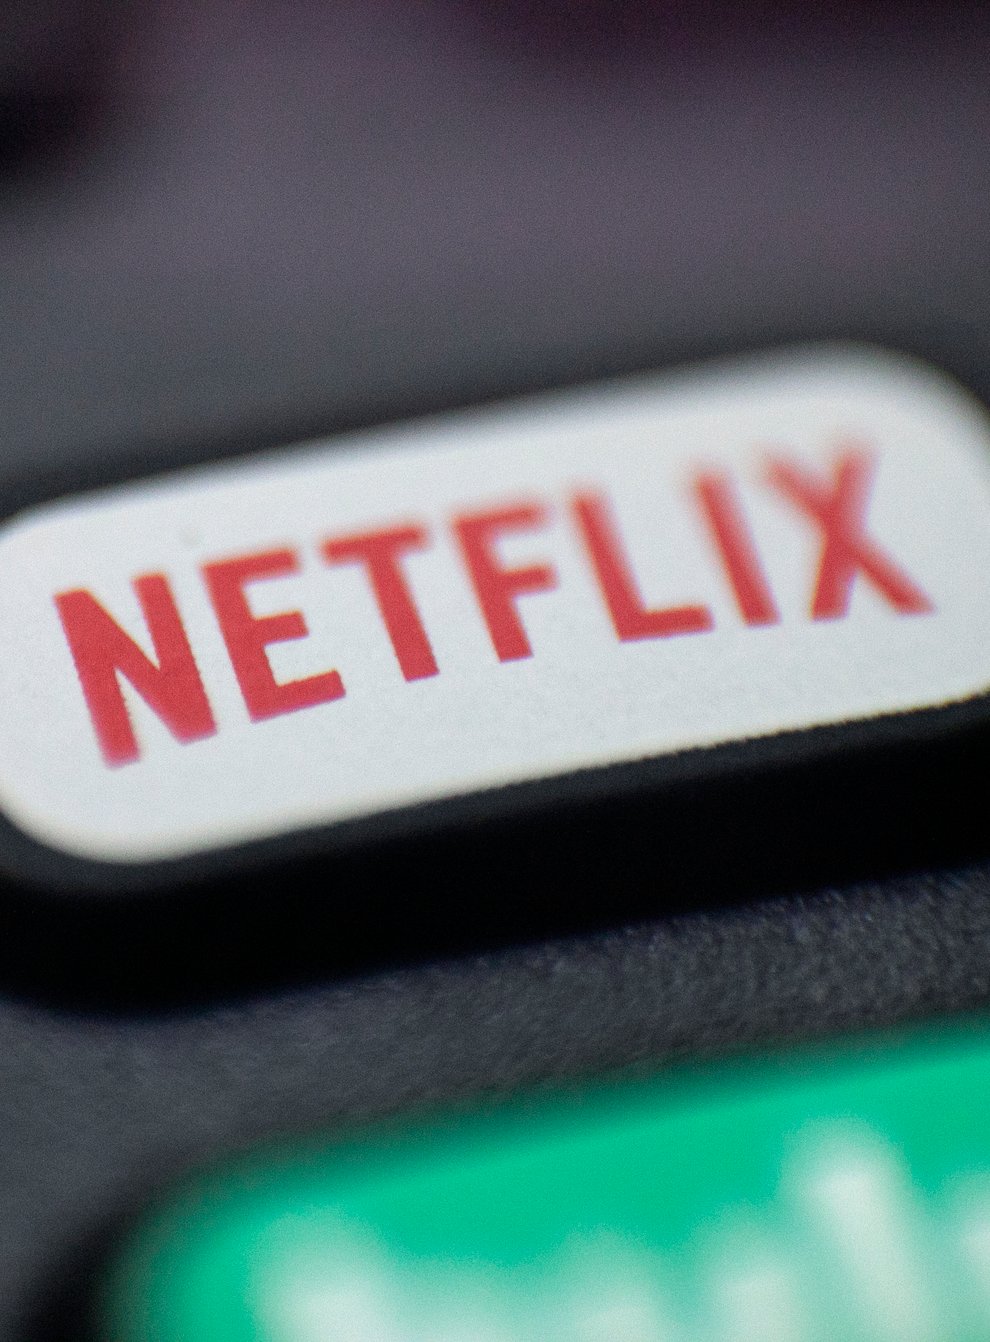 Netflix reported its worst slowdown in subscriber growth in eight years